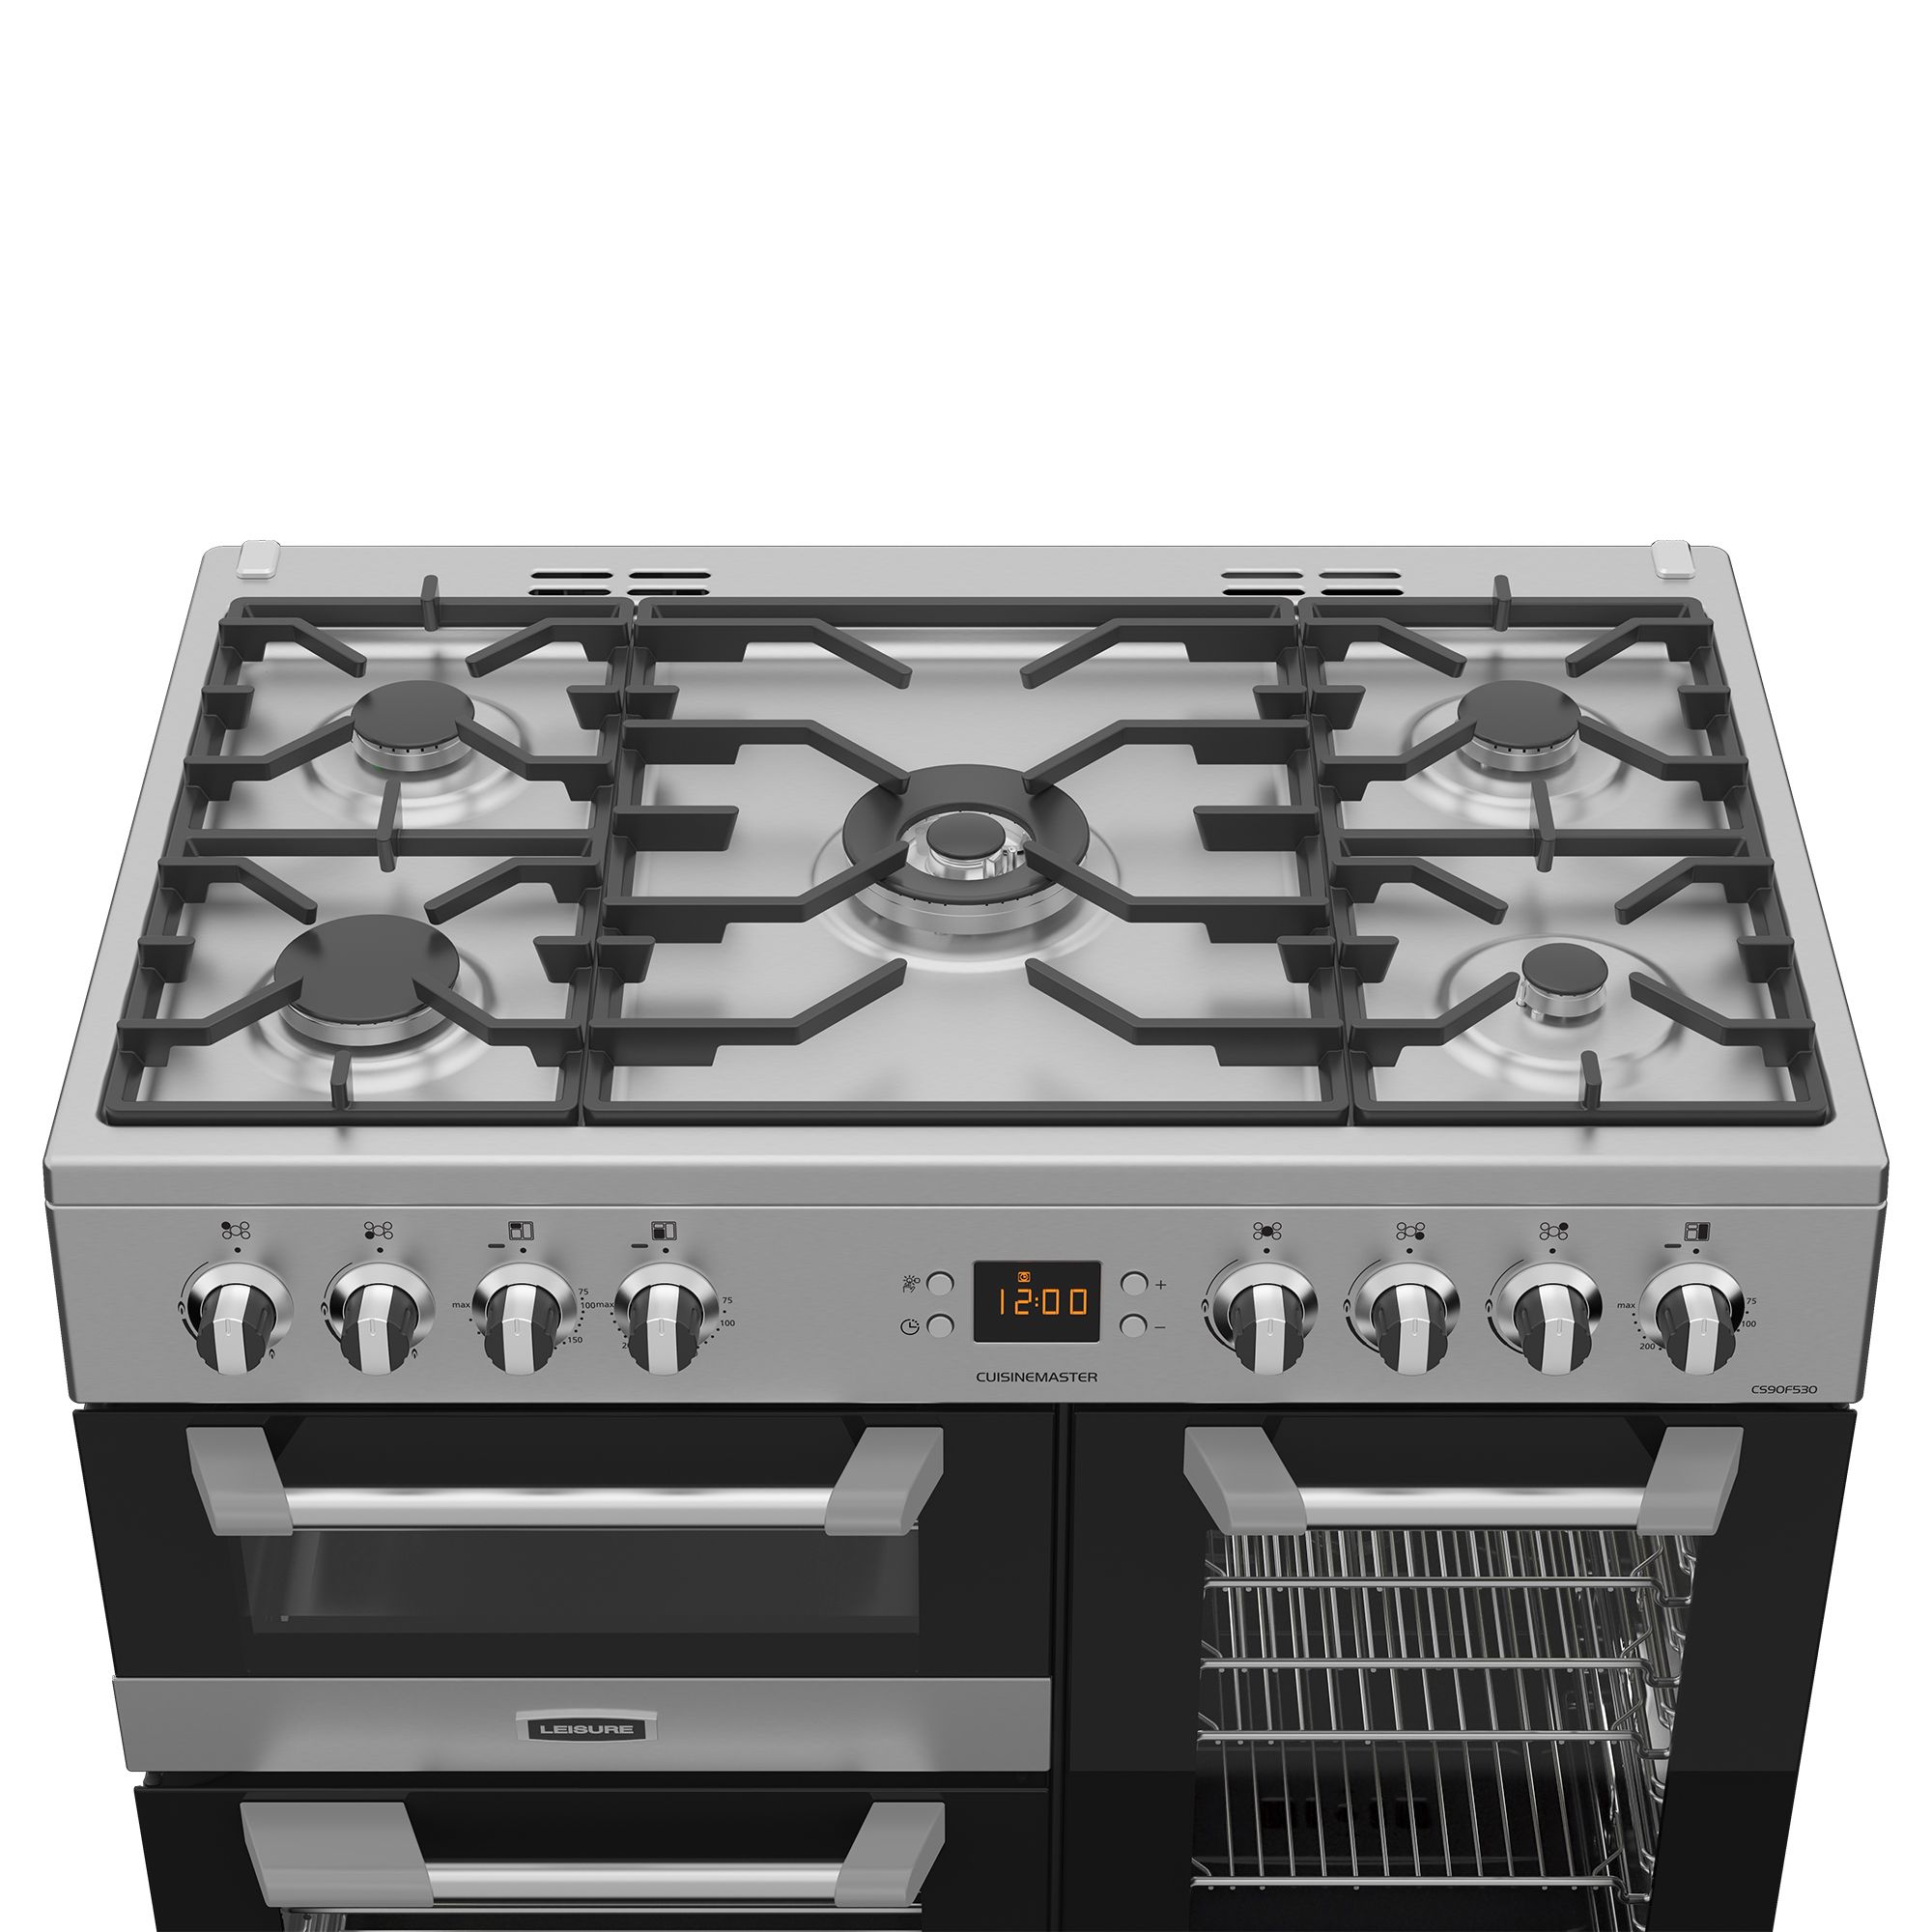 Leisure CS90F530X Freestanding Electric Range cooker with Gas Hob